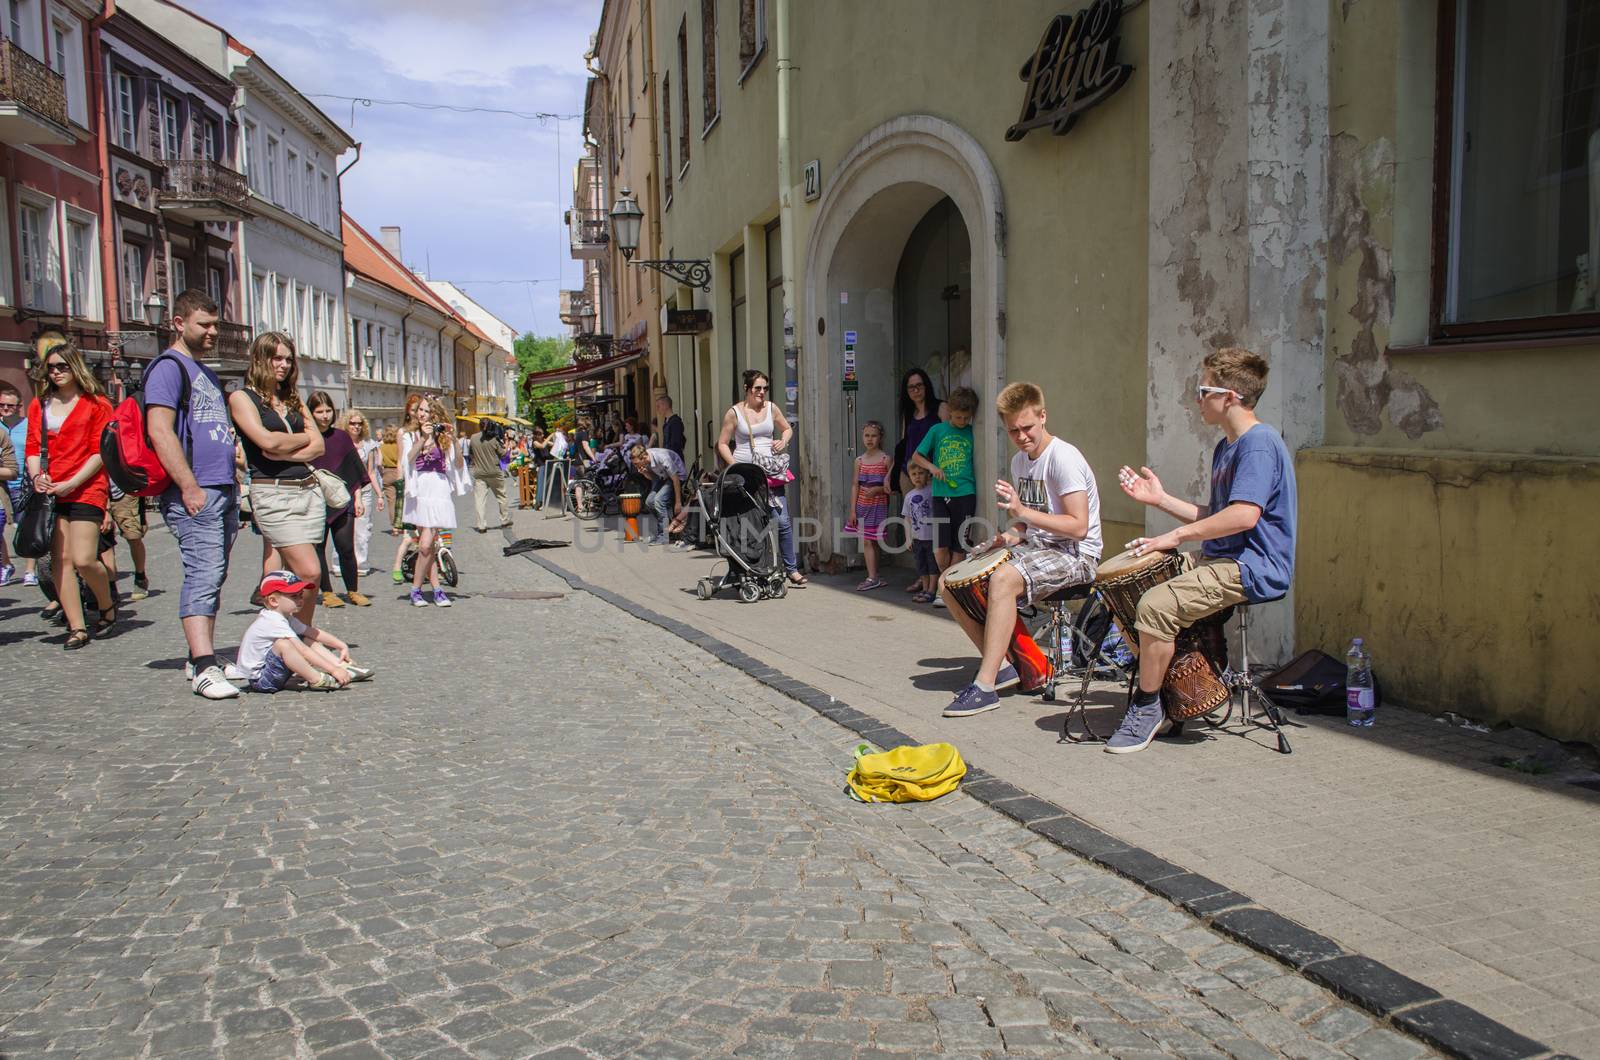 VILNIUS, LITHUANIA - MAY 18: boys with percussion on street musician festival and people flocks around on May 18, 2013 in Vilnius.